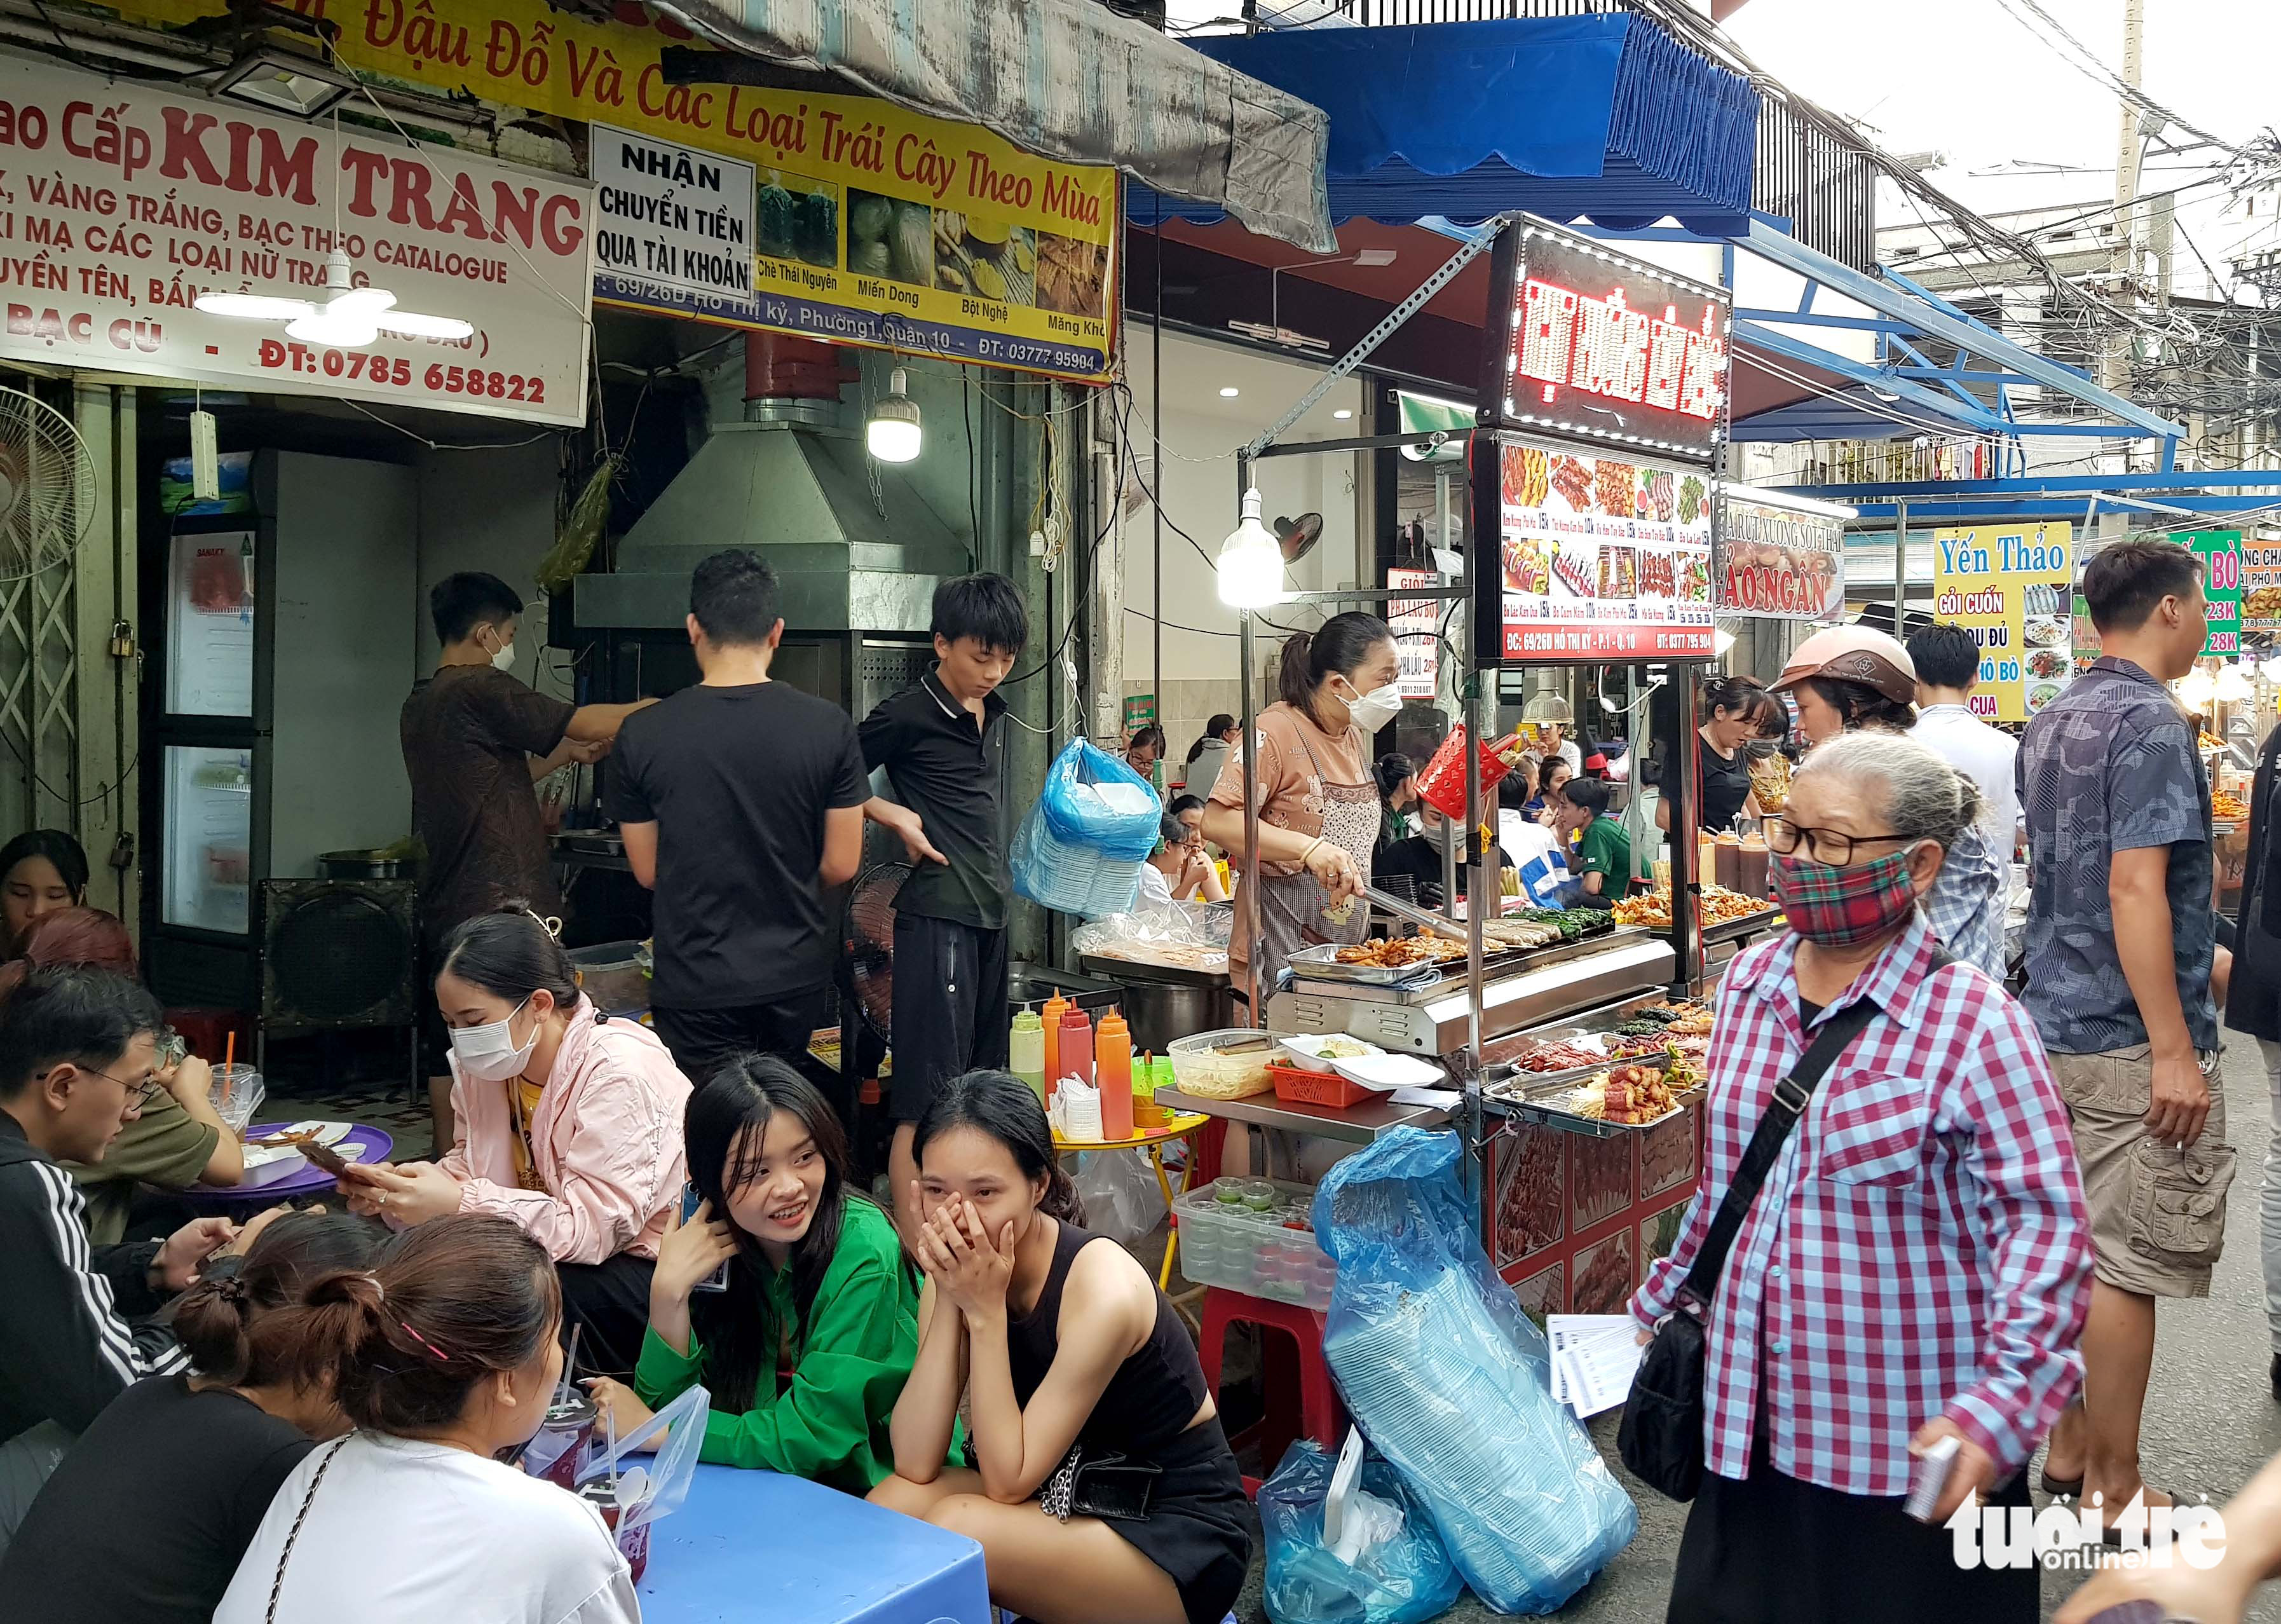 A crowded eatery at the Cambodian Market in District 10, Ho Chi Minh City, May 7, 2022. Photo: Nhat Xuan / Tuoi Tre